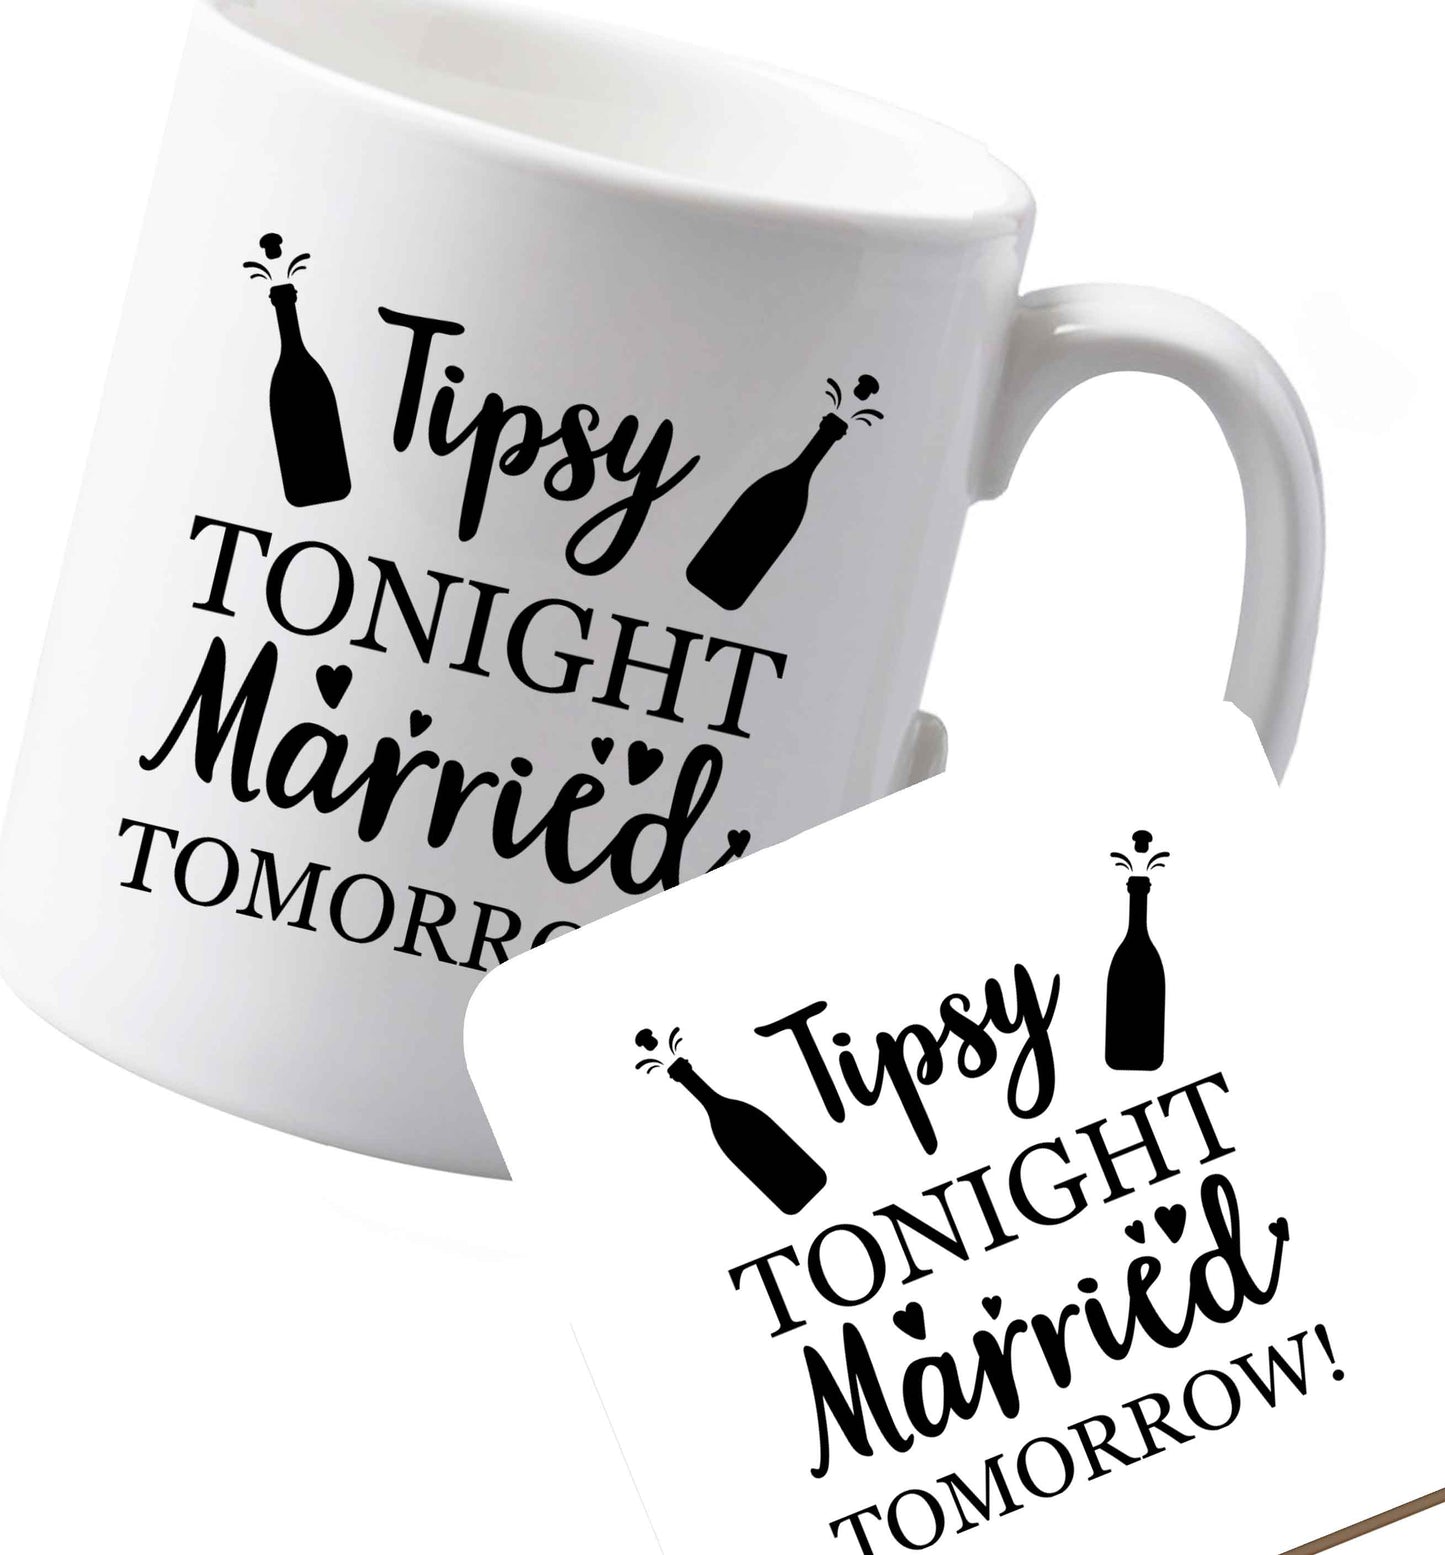 10 oz Ceramic mug and coaster Personalised wedding thank you's Mr and Mrs wedding and date! Ideal wedding favours!   both sides